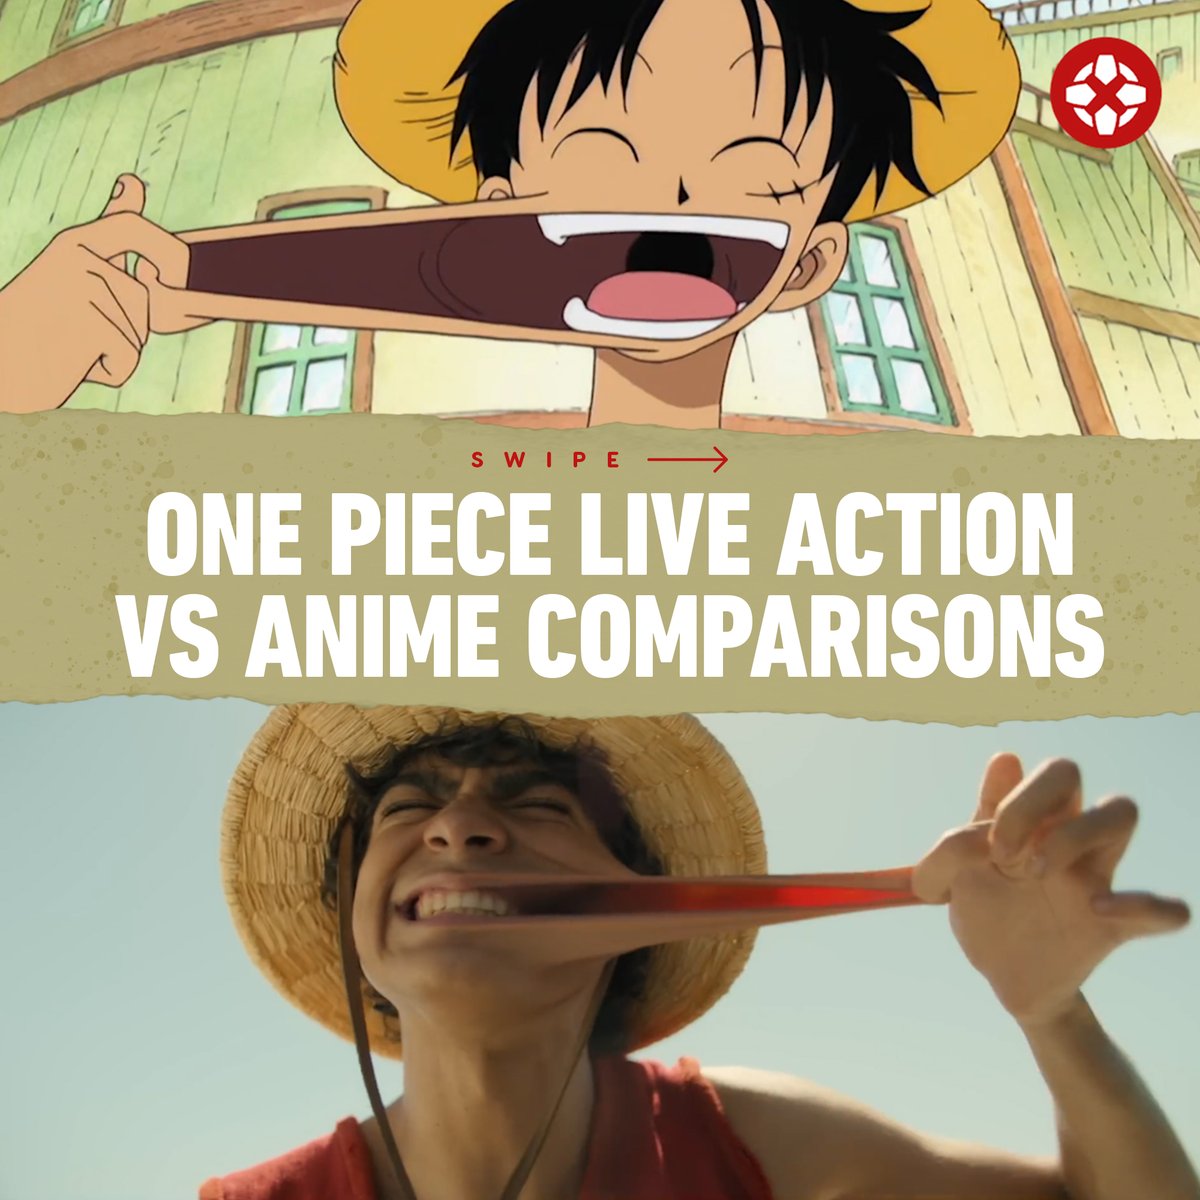 One Piece [Live-Action] - IGN